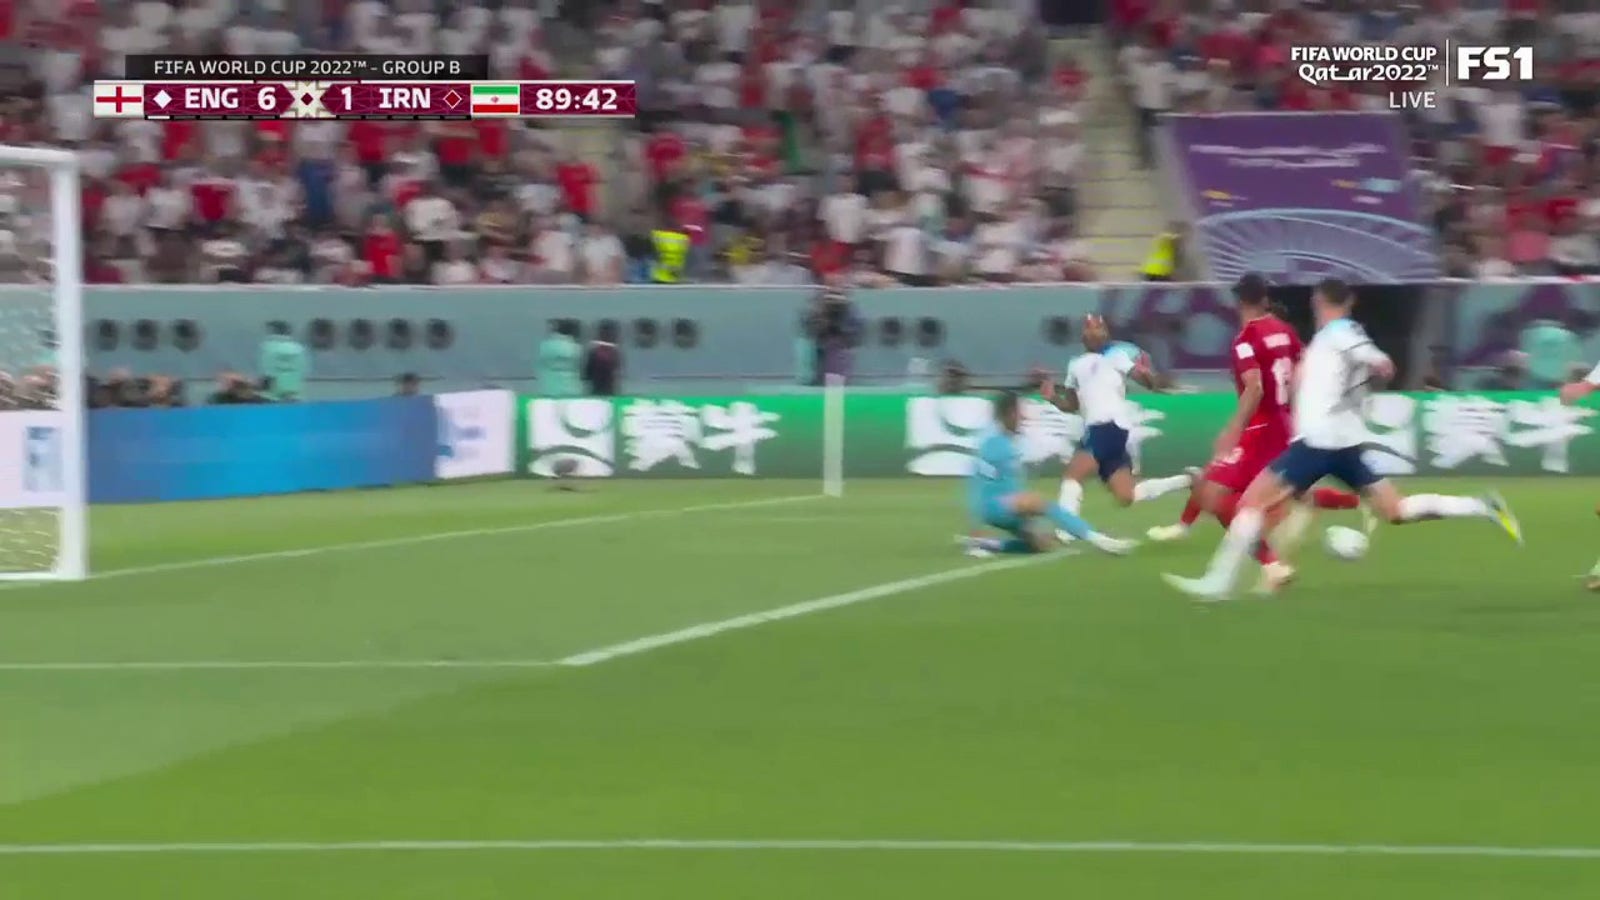 England's Jack Grealish scored against Iran in the 89th minute 